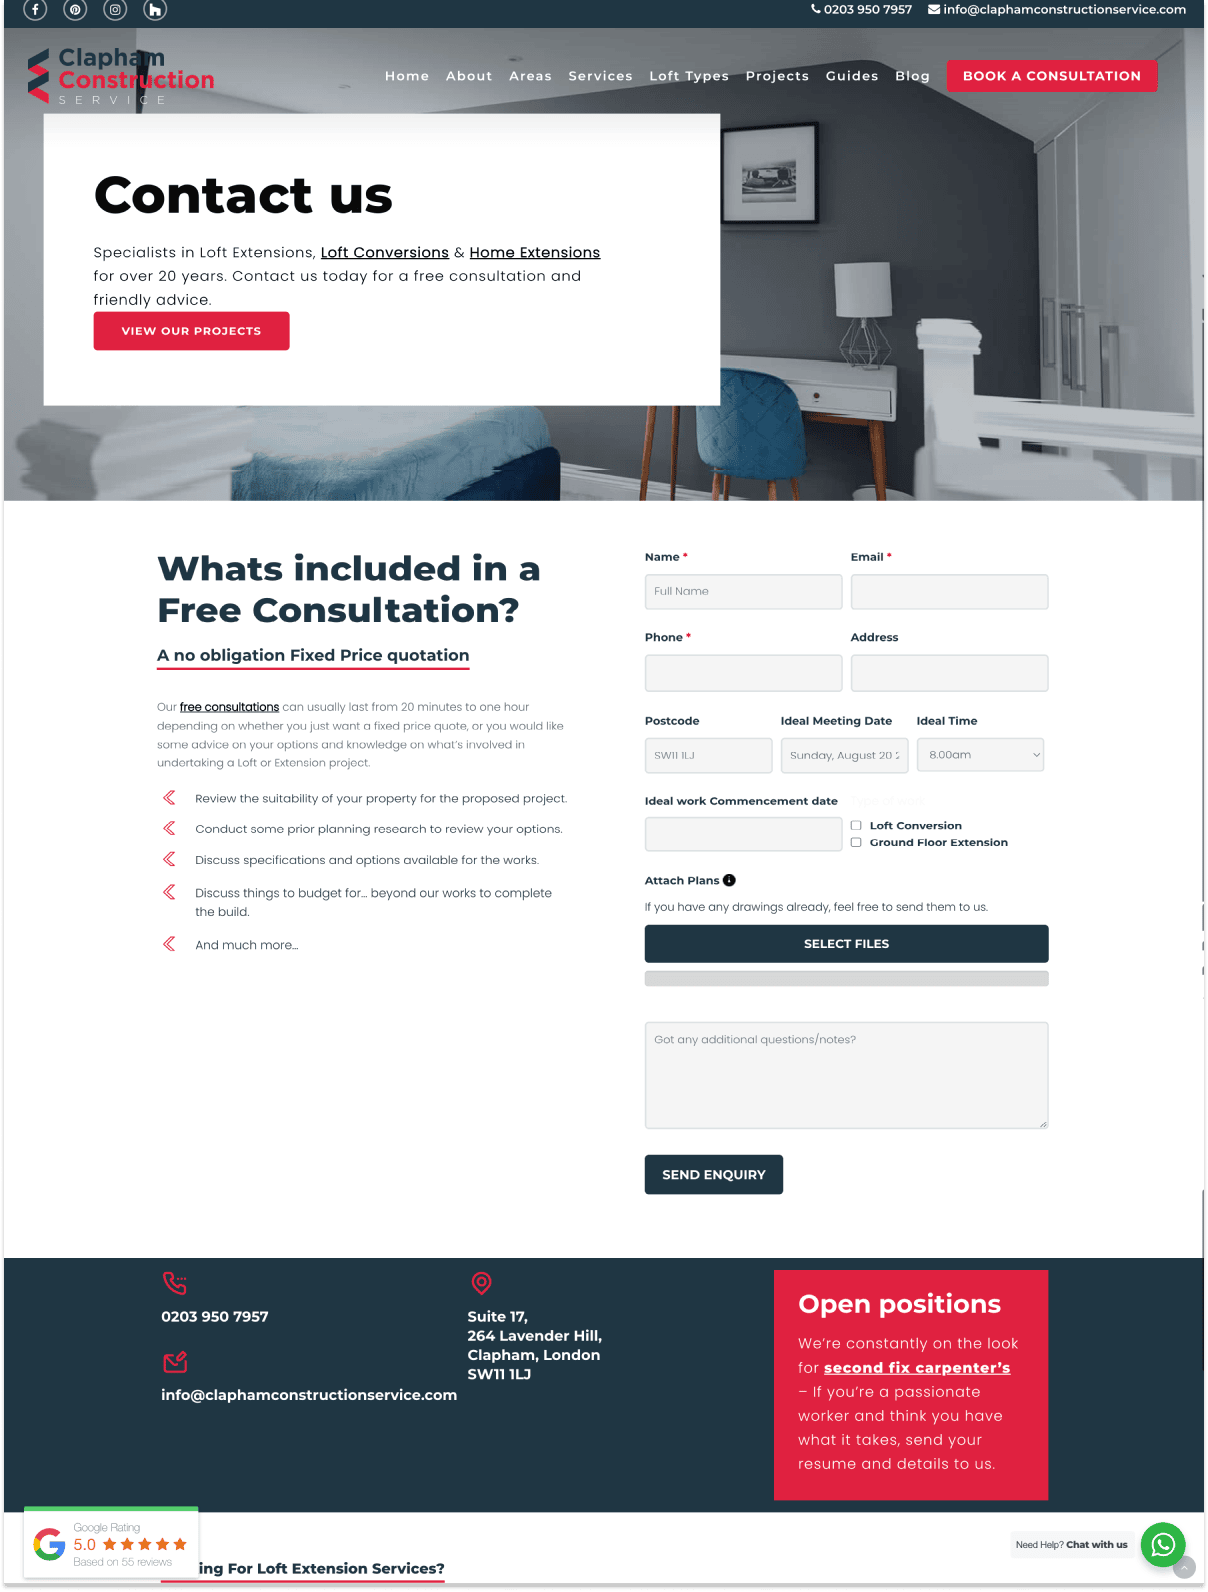 Clapham Construction service free consultation booking page